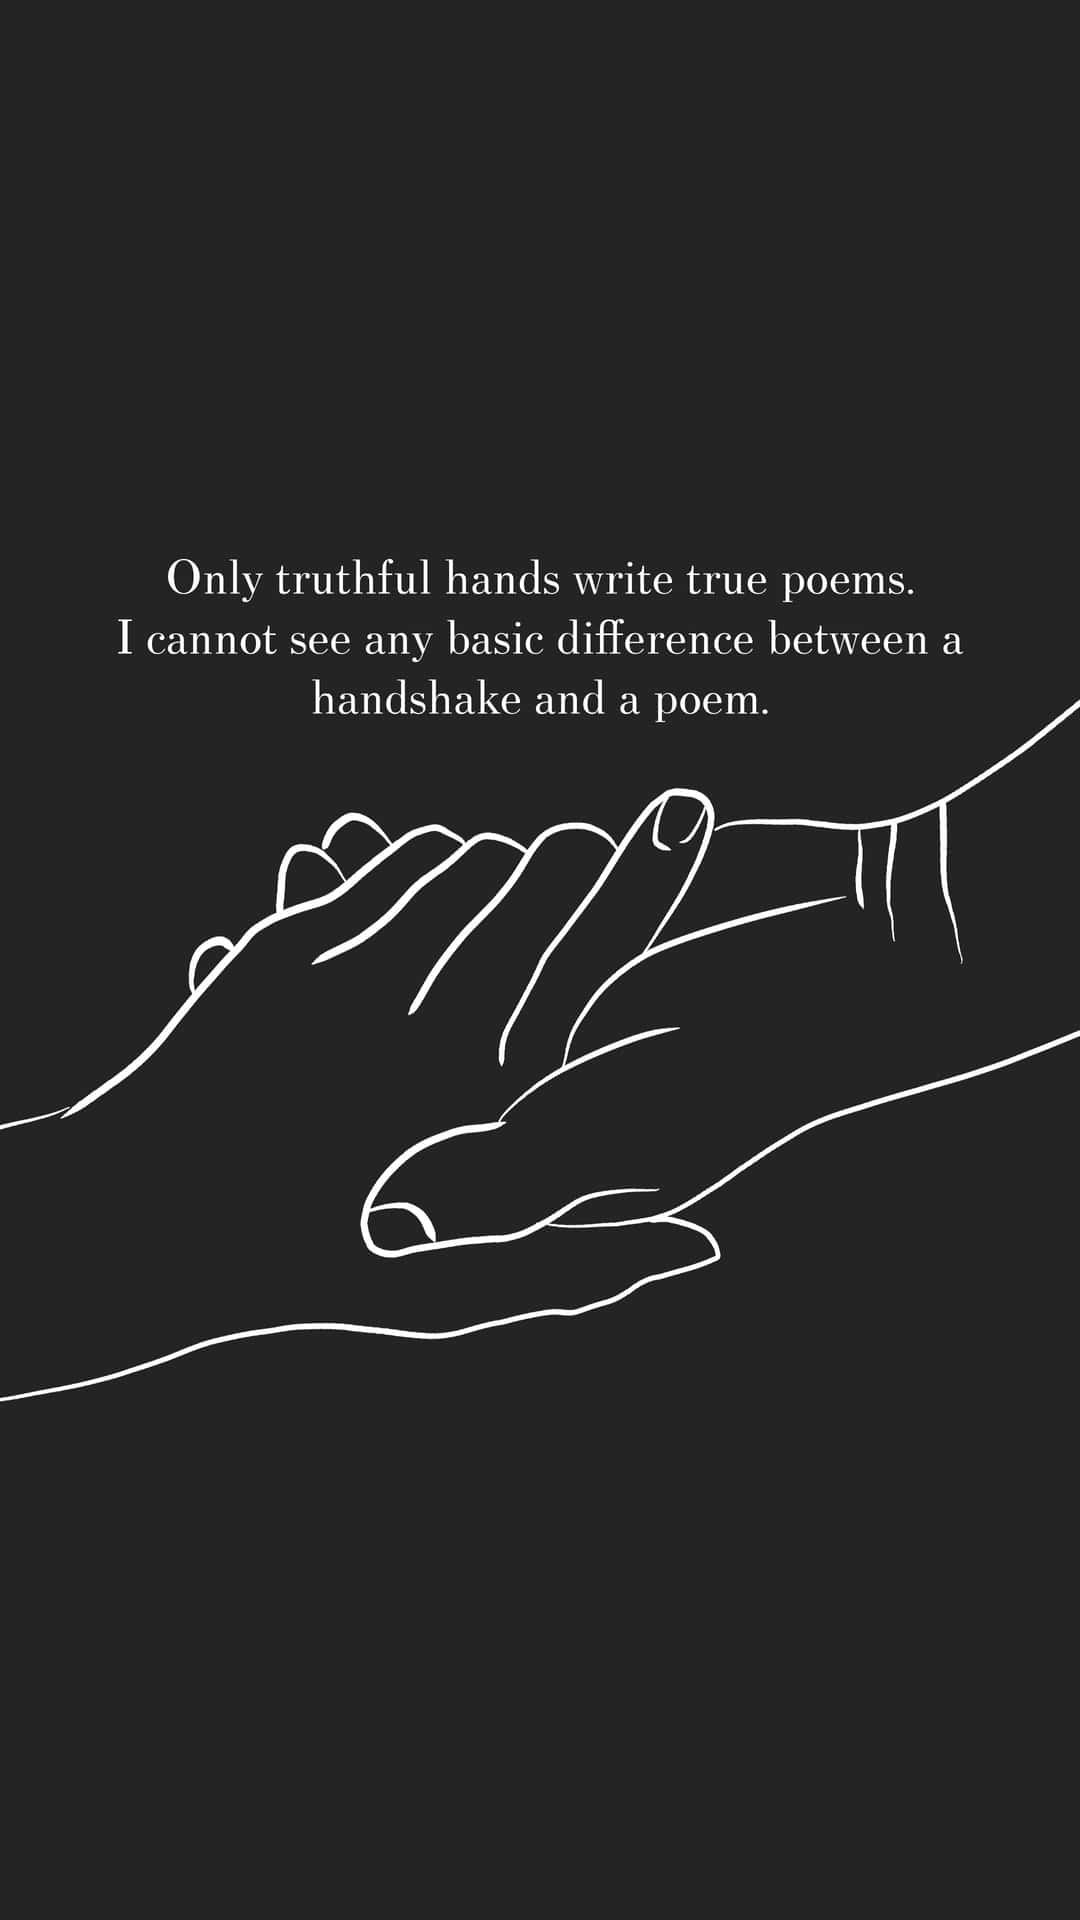 Illustration Of A Handshake With Inspirational Quote Background